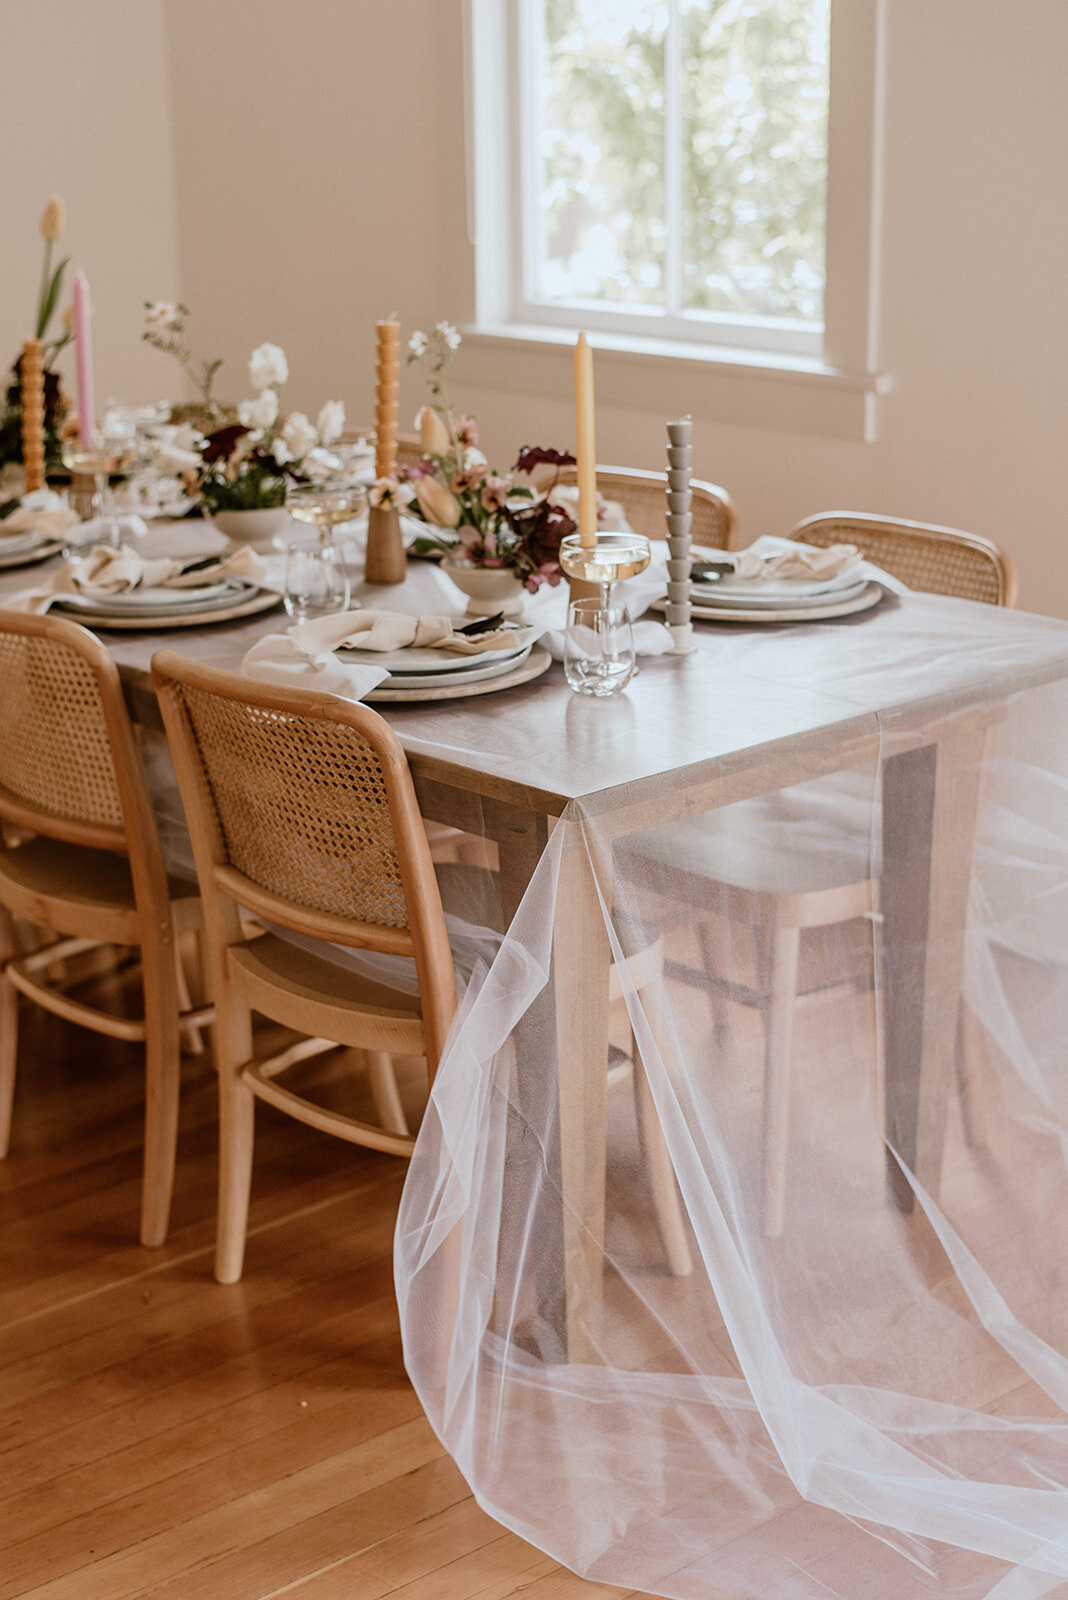 a-Lily-and-cane-event-furniture-rental-portland-wood-dining-table-rental-21